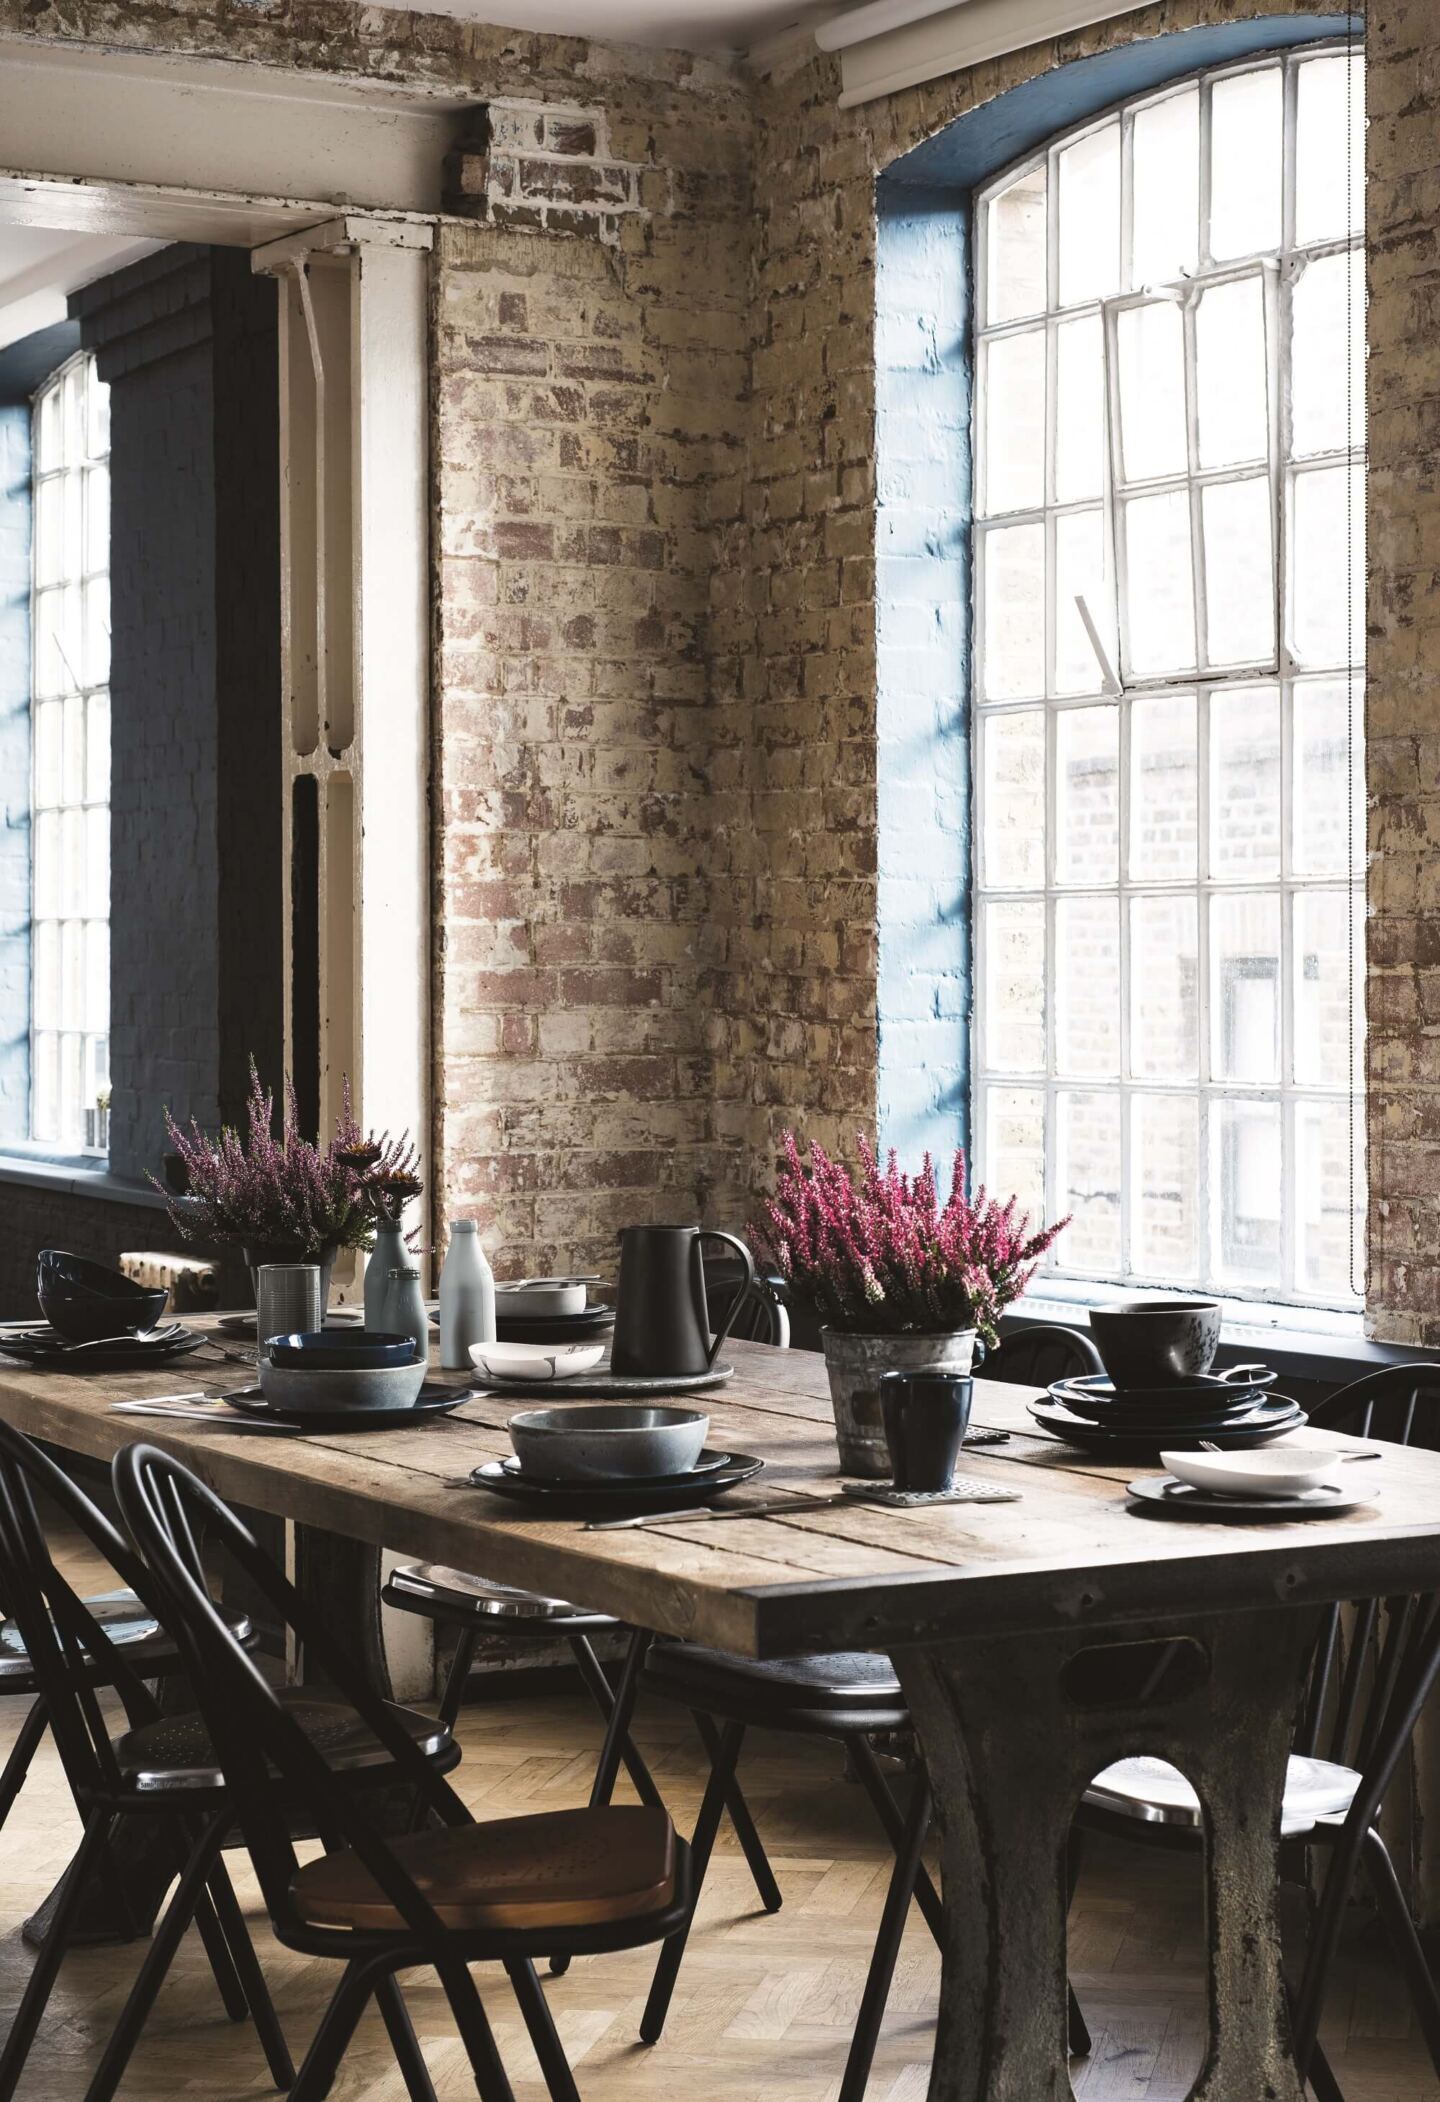 Industrial loft-style dining room. A large rectangular dining table with 6 chairs around situated in front of industrial windows